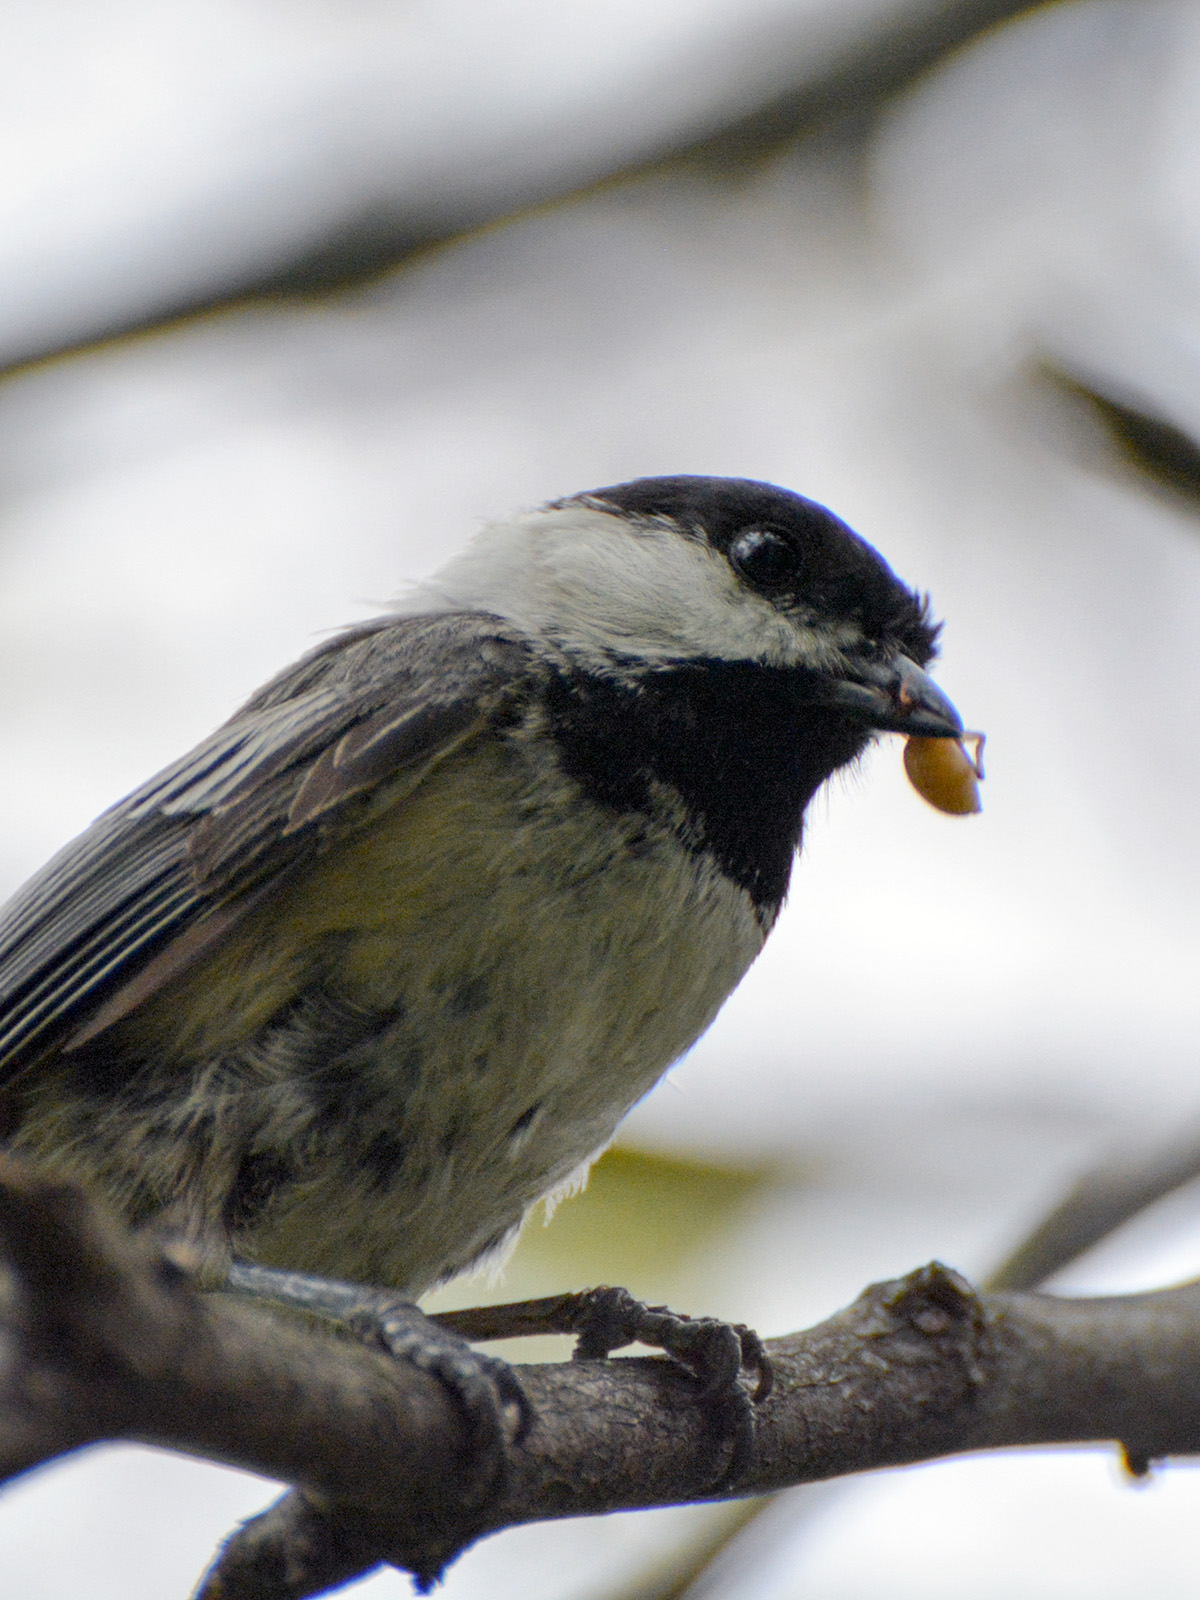 Chickadee with insect to feed babies